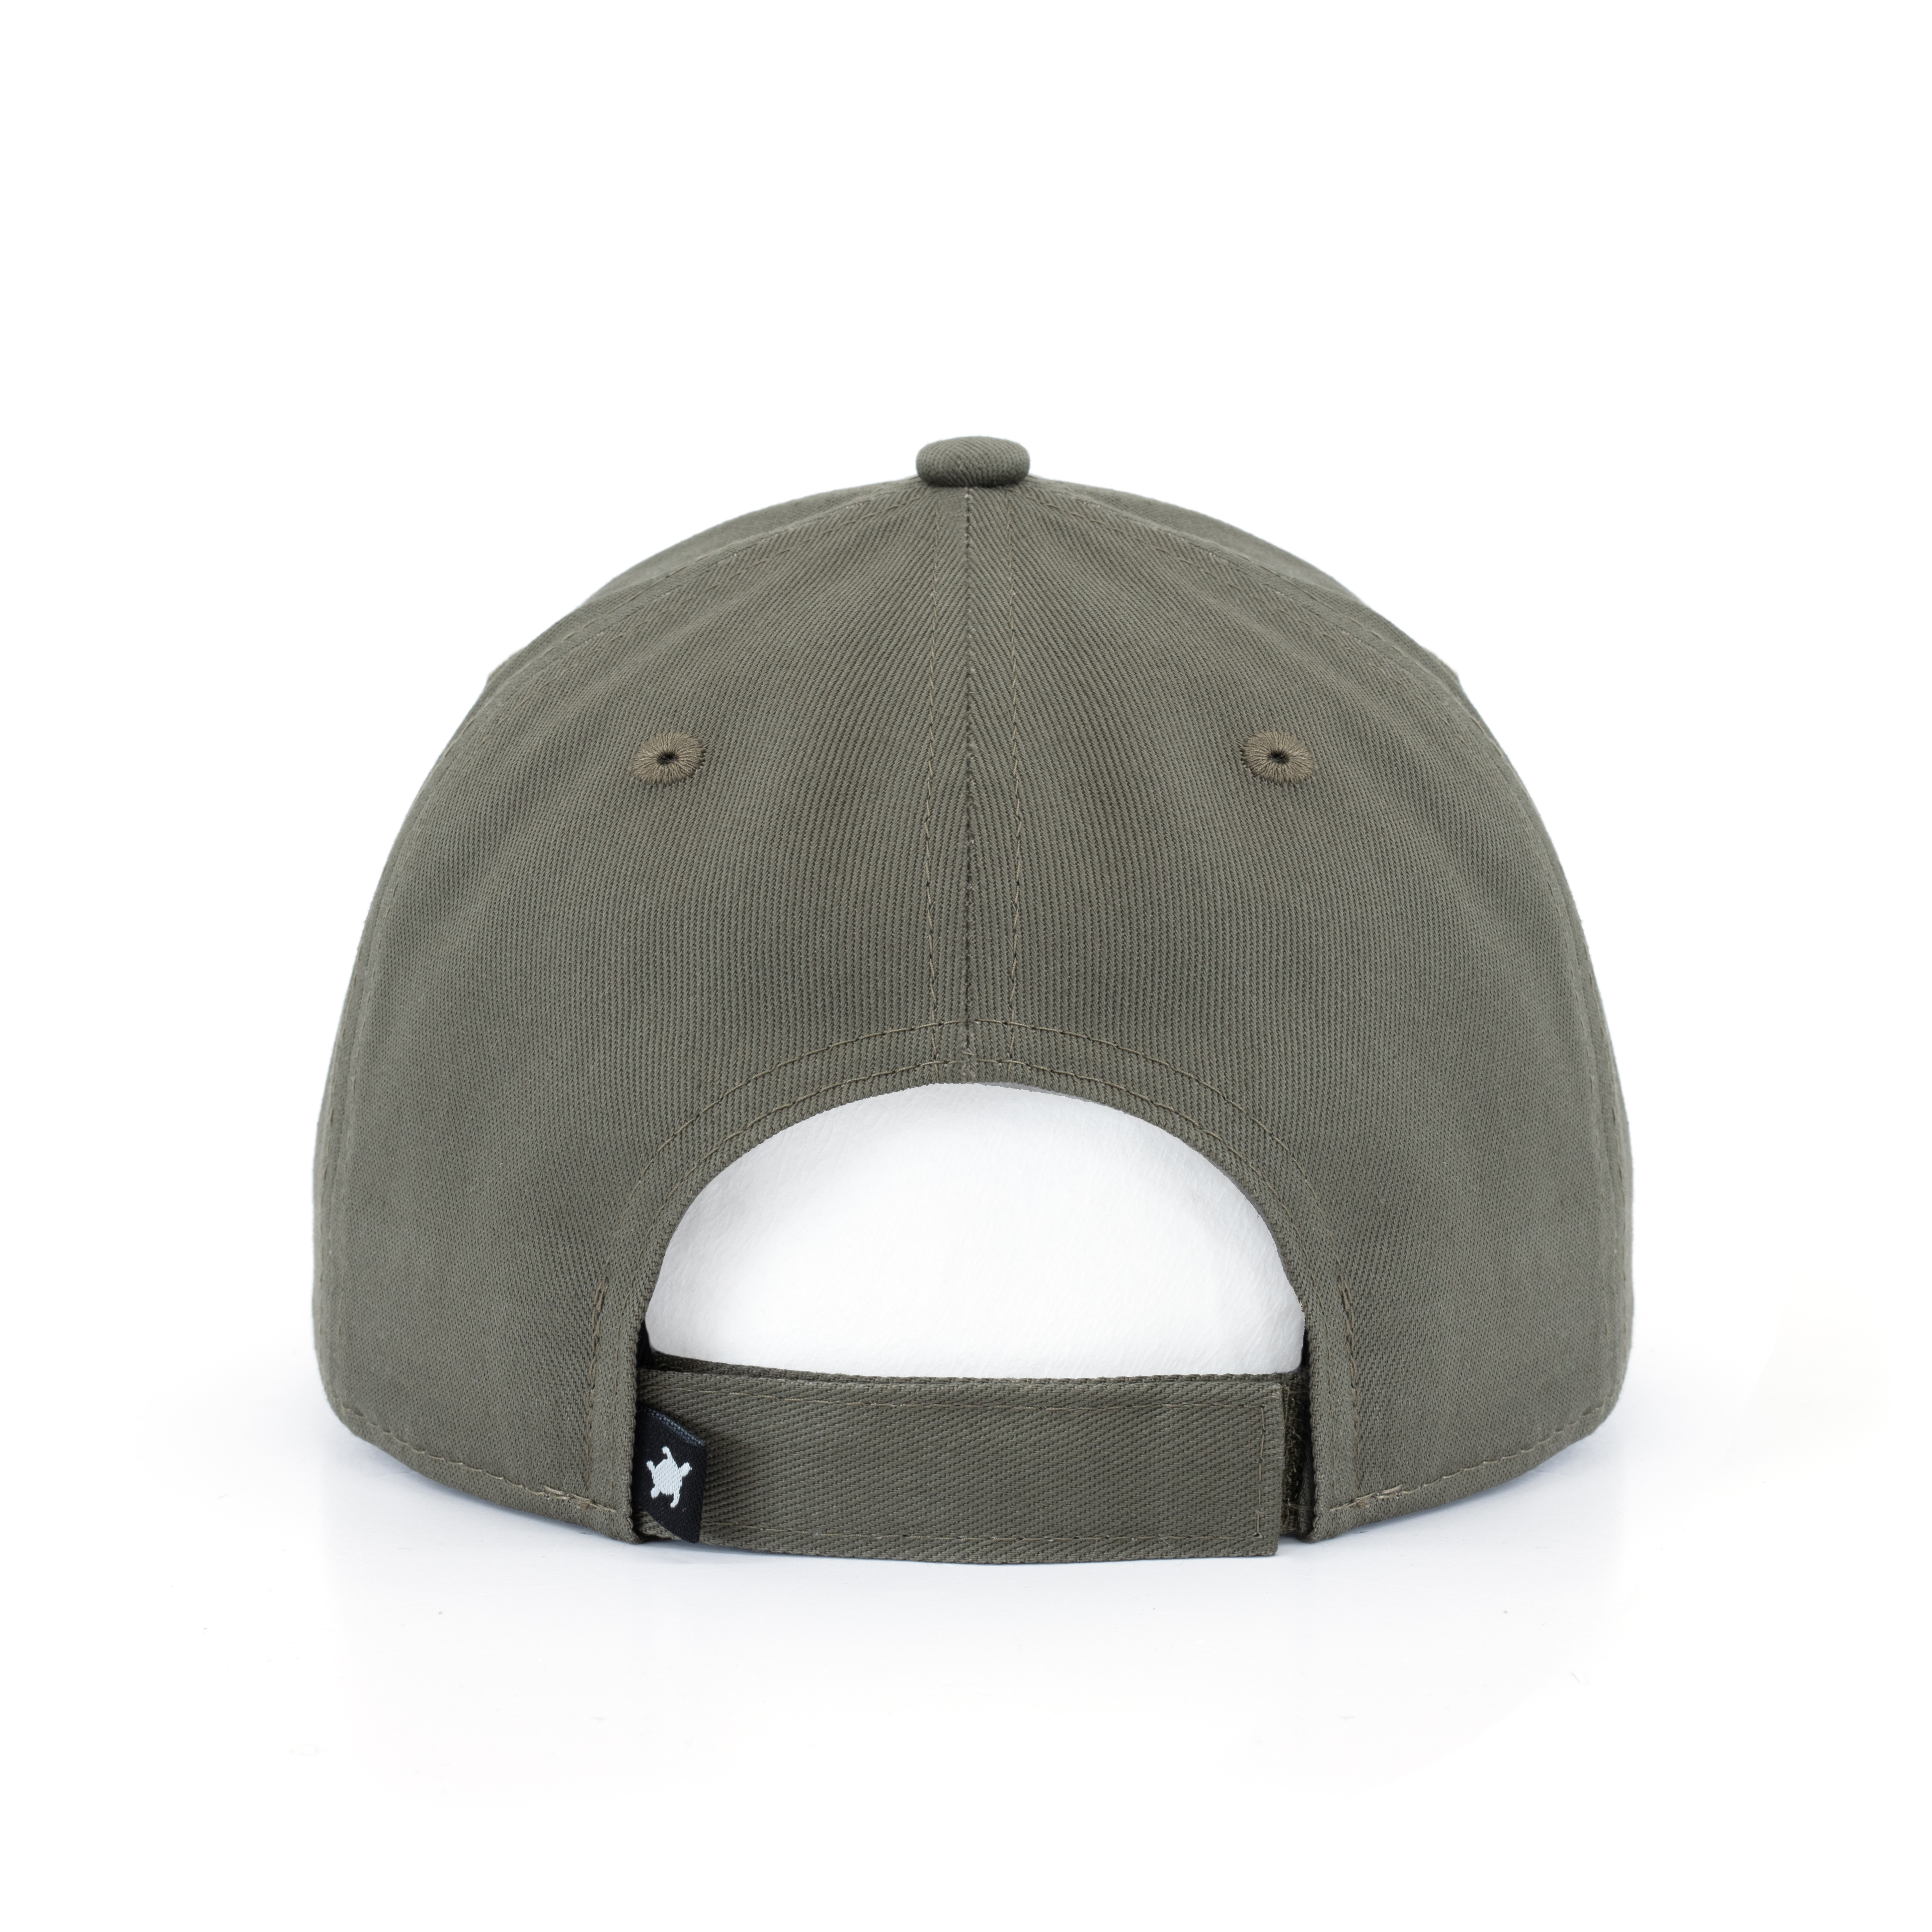 Smith & Miller Beverly Cap, olive